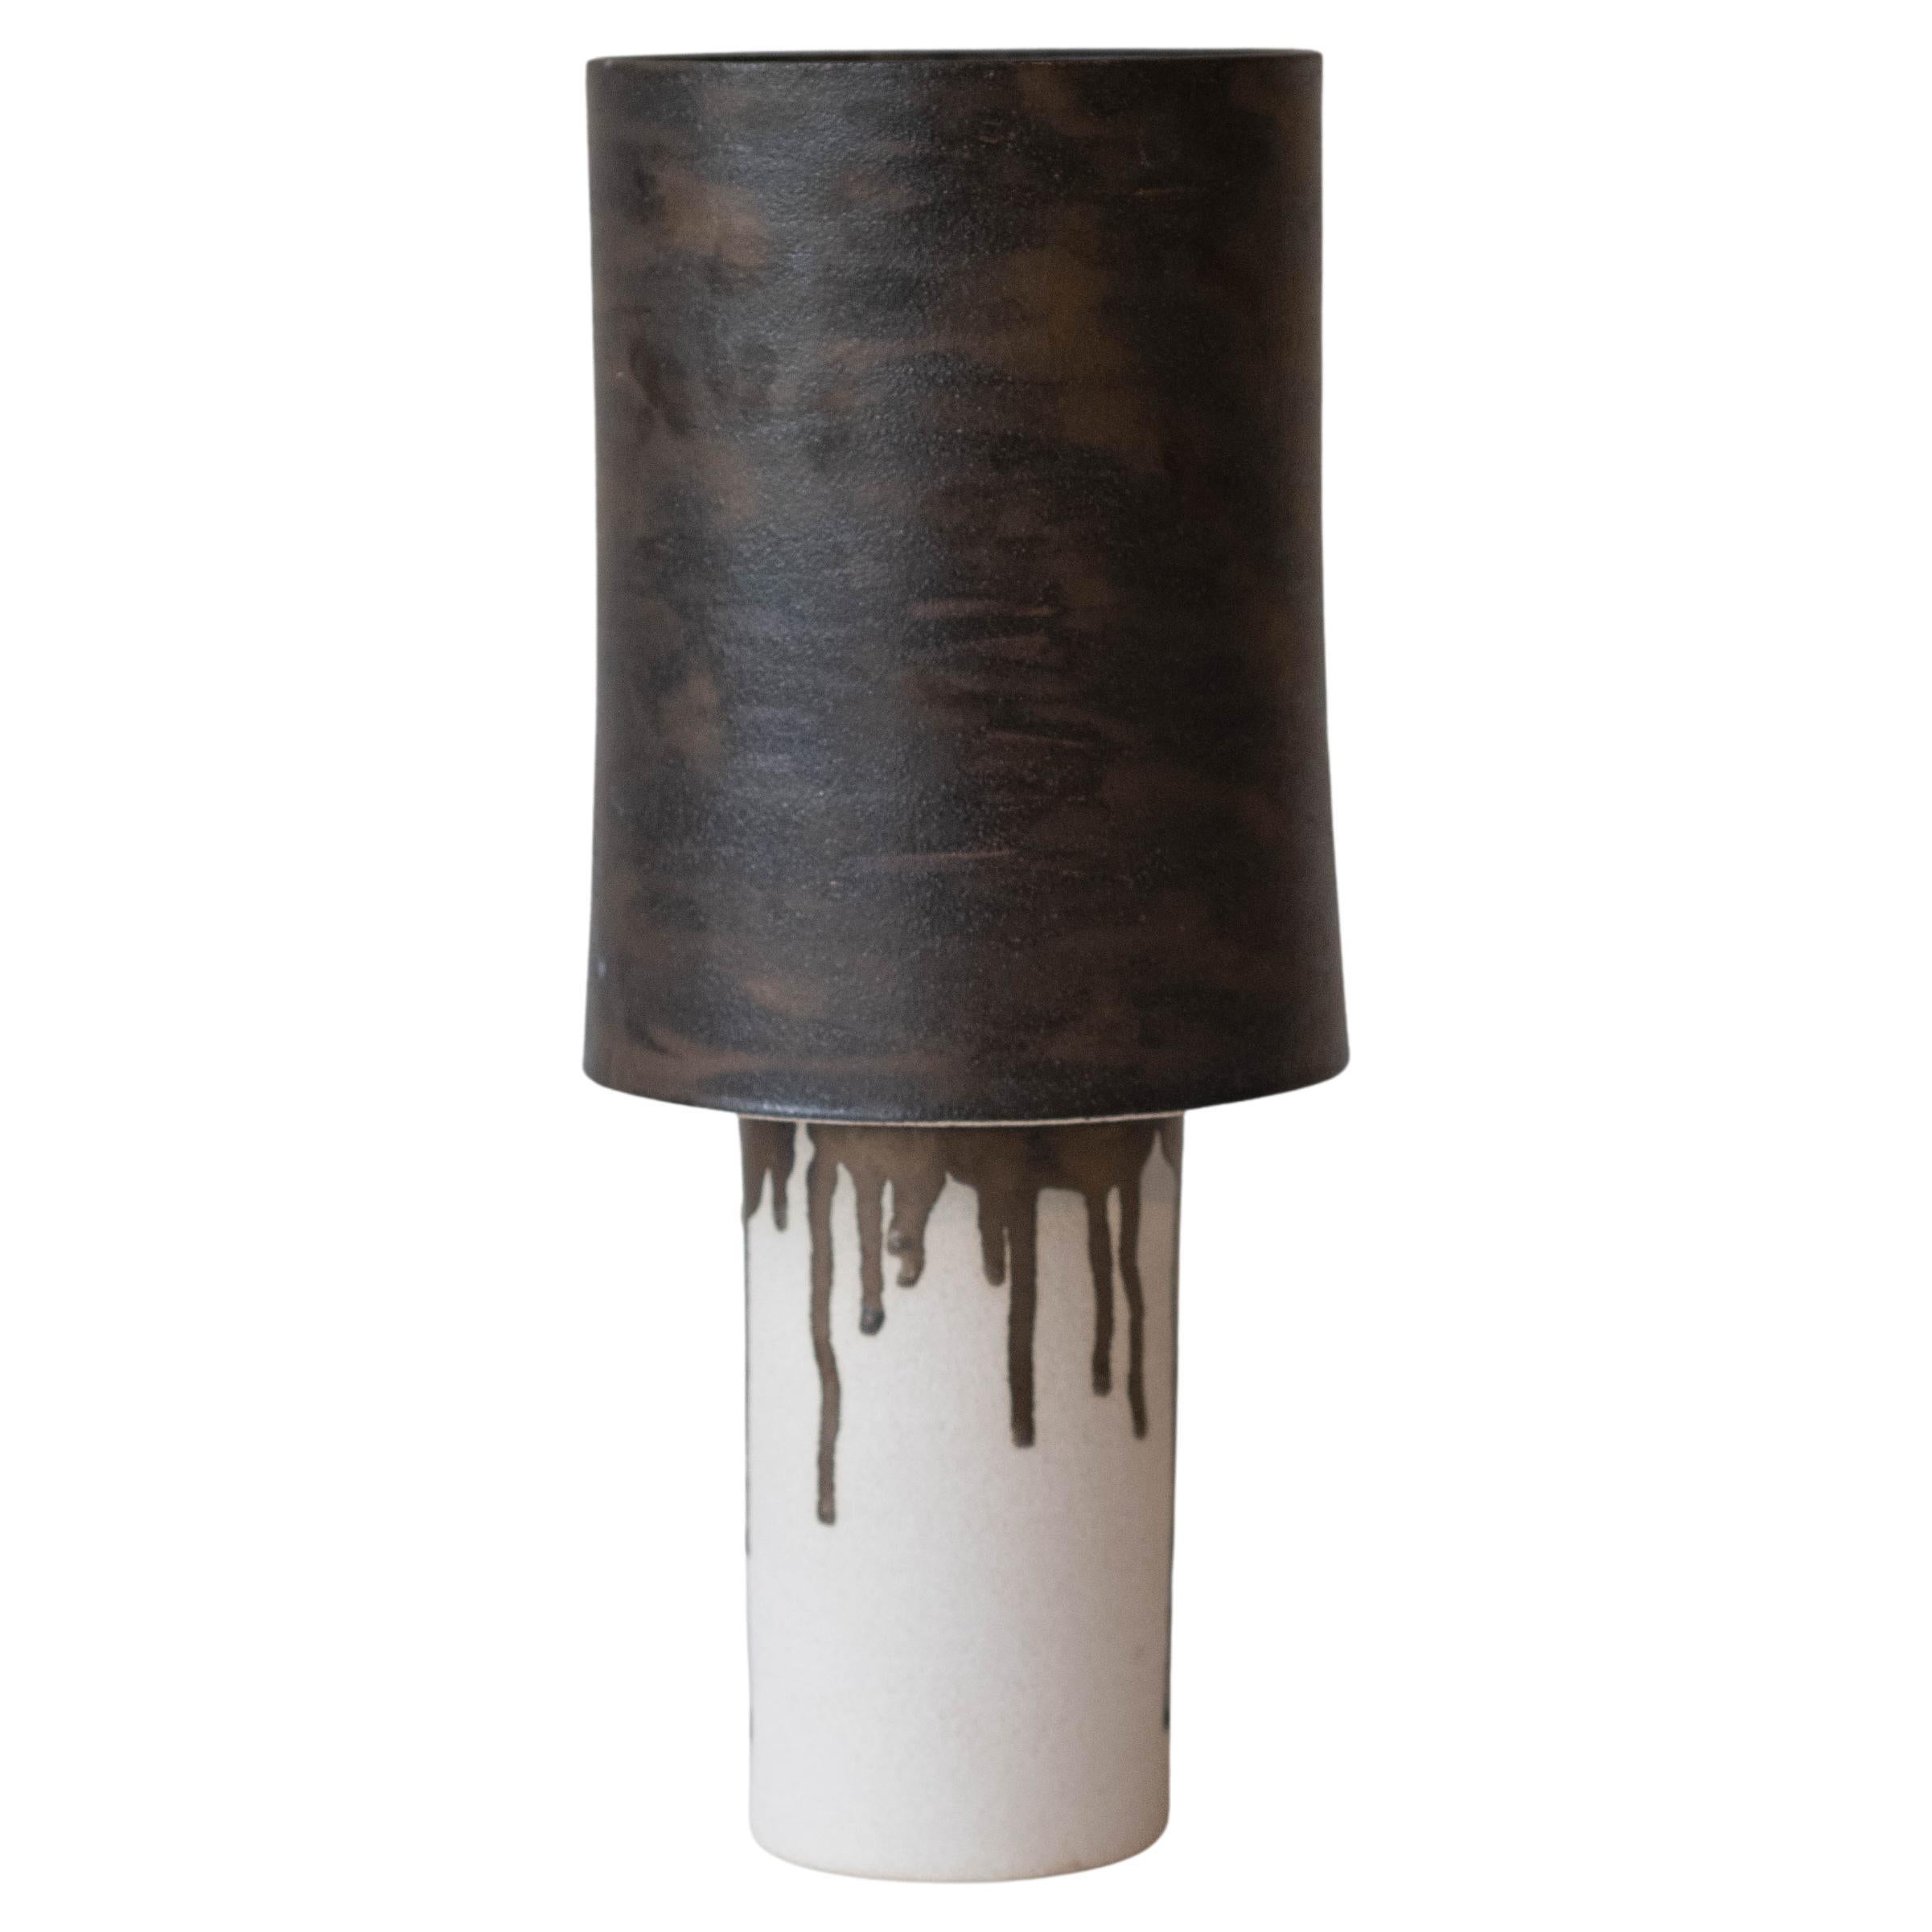 Drippy Ceramic Straight Walled Lamp For Sale